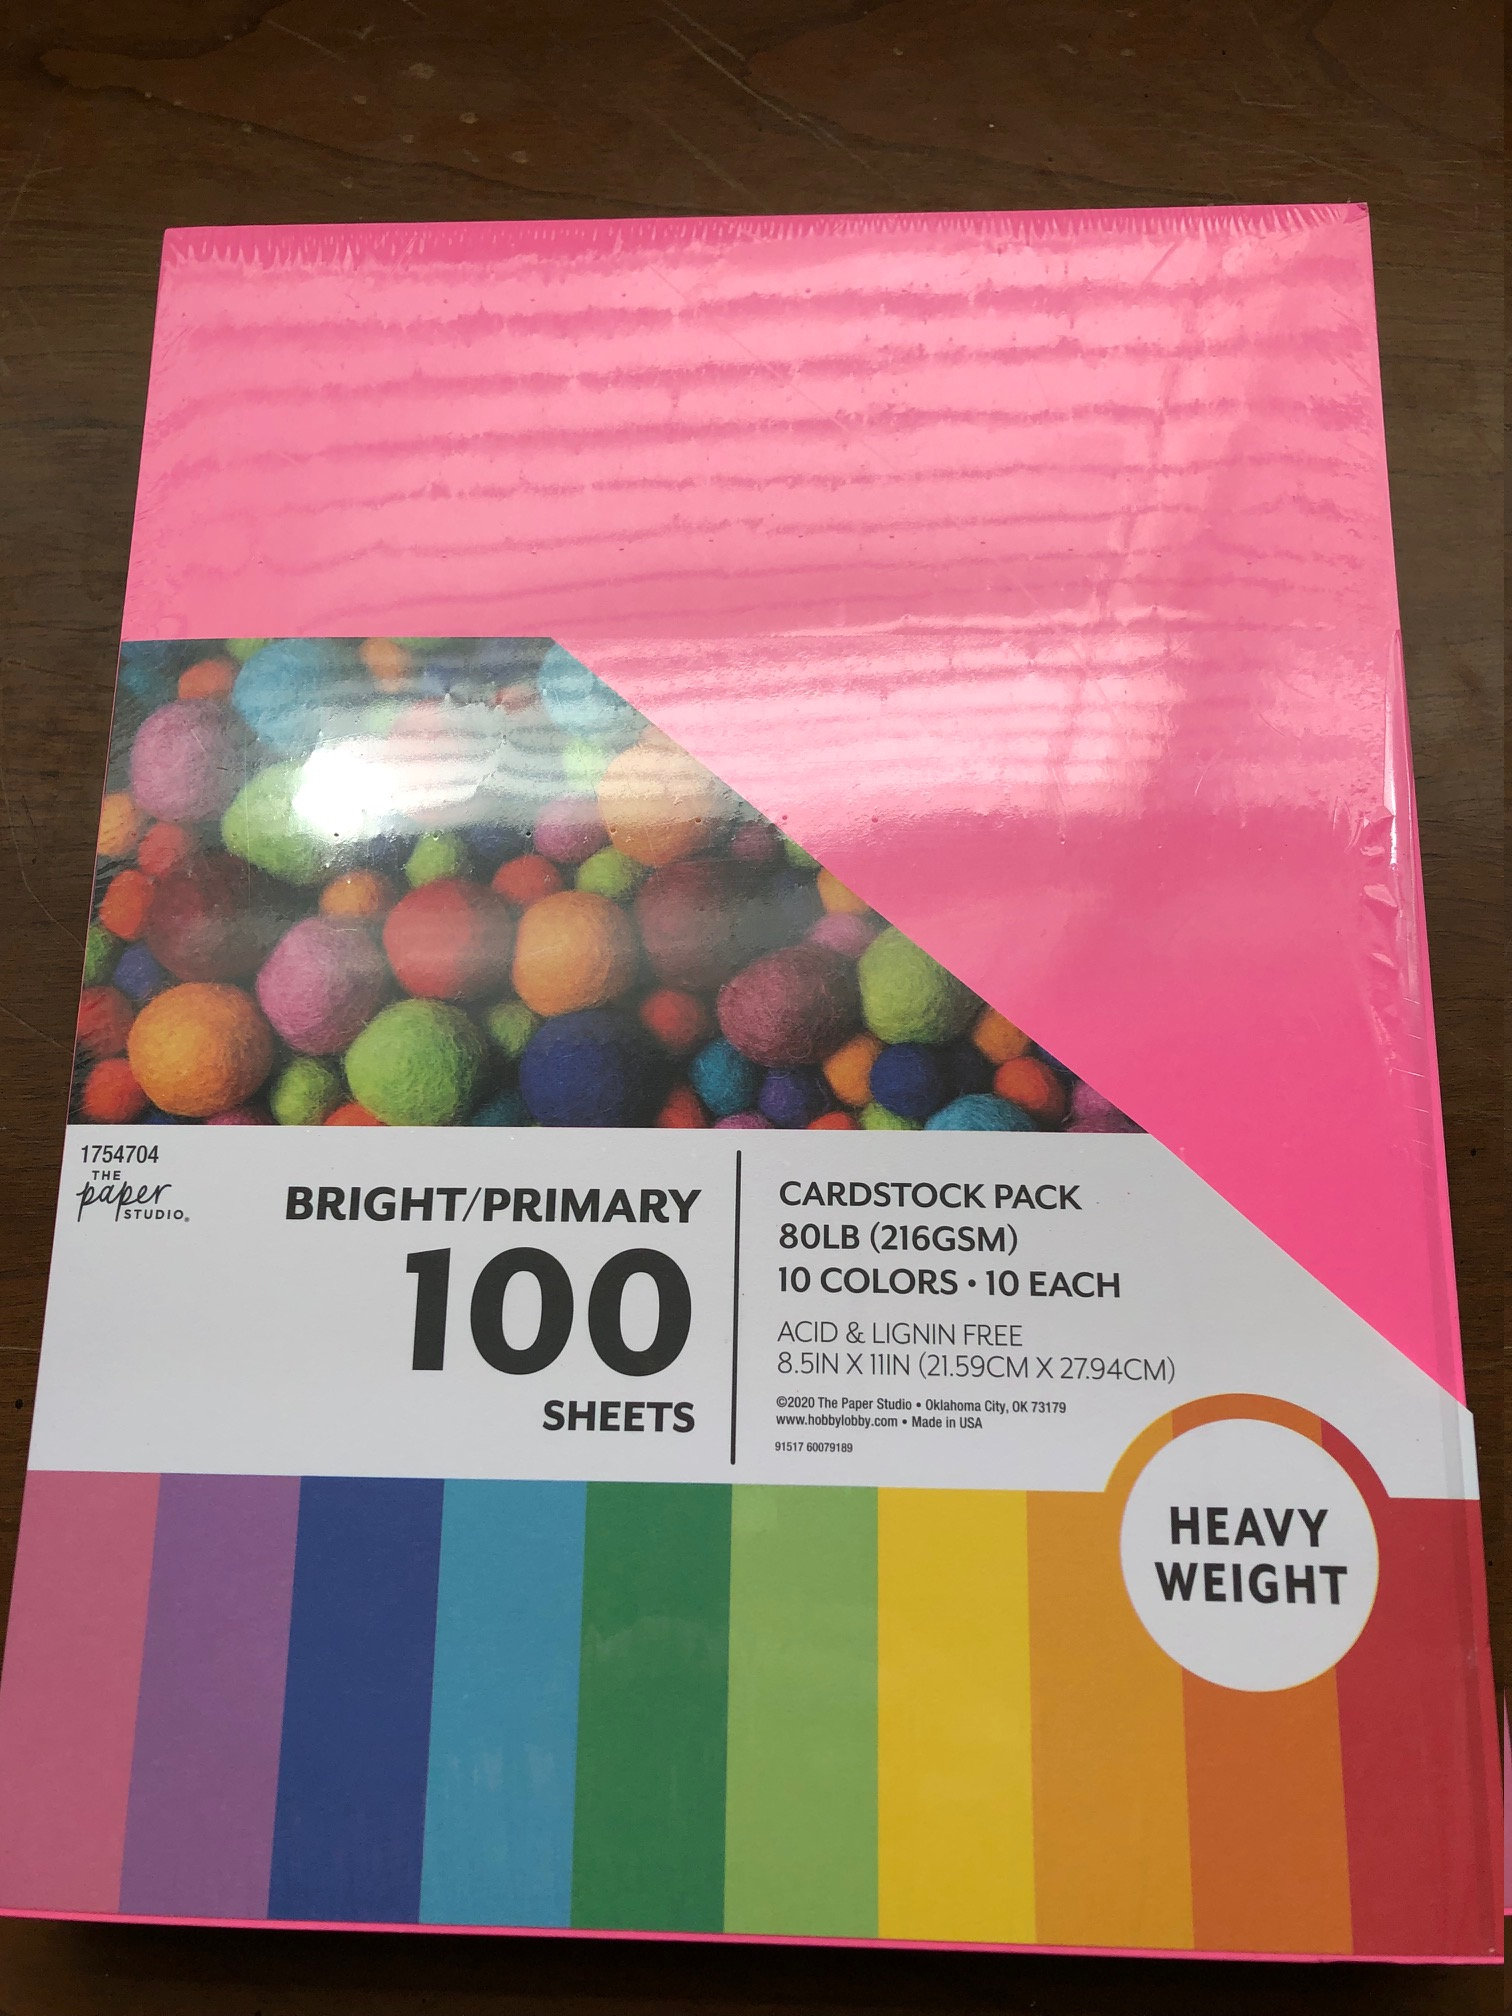 Color Card Stock Paper, 8.5 x 11/50 Sheets Per Pack - Red Color 216gsm